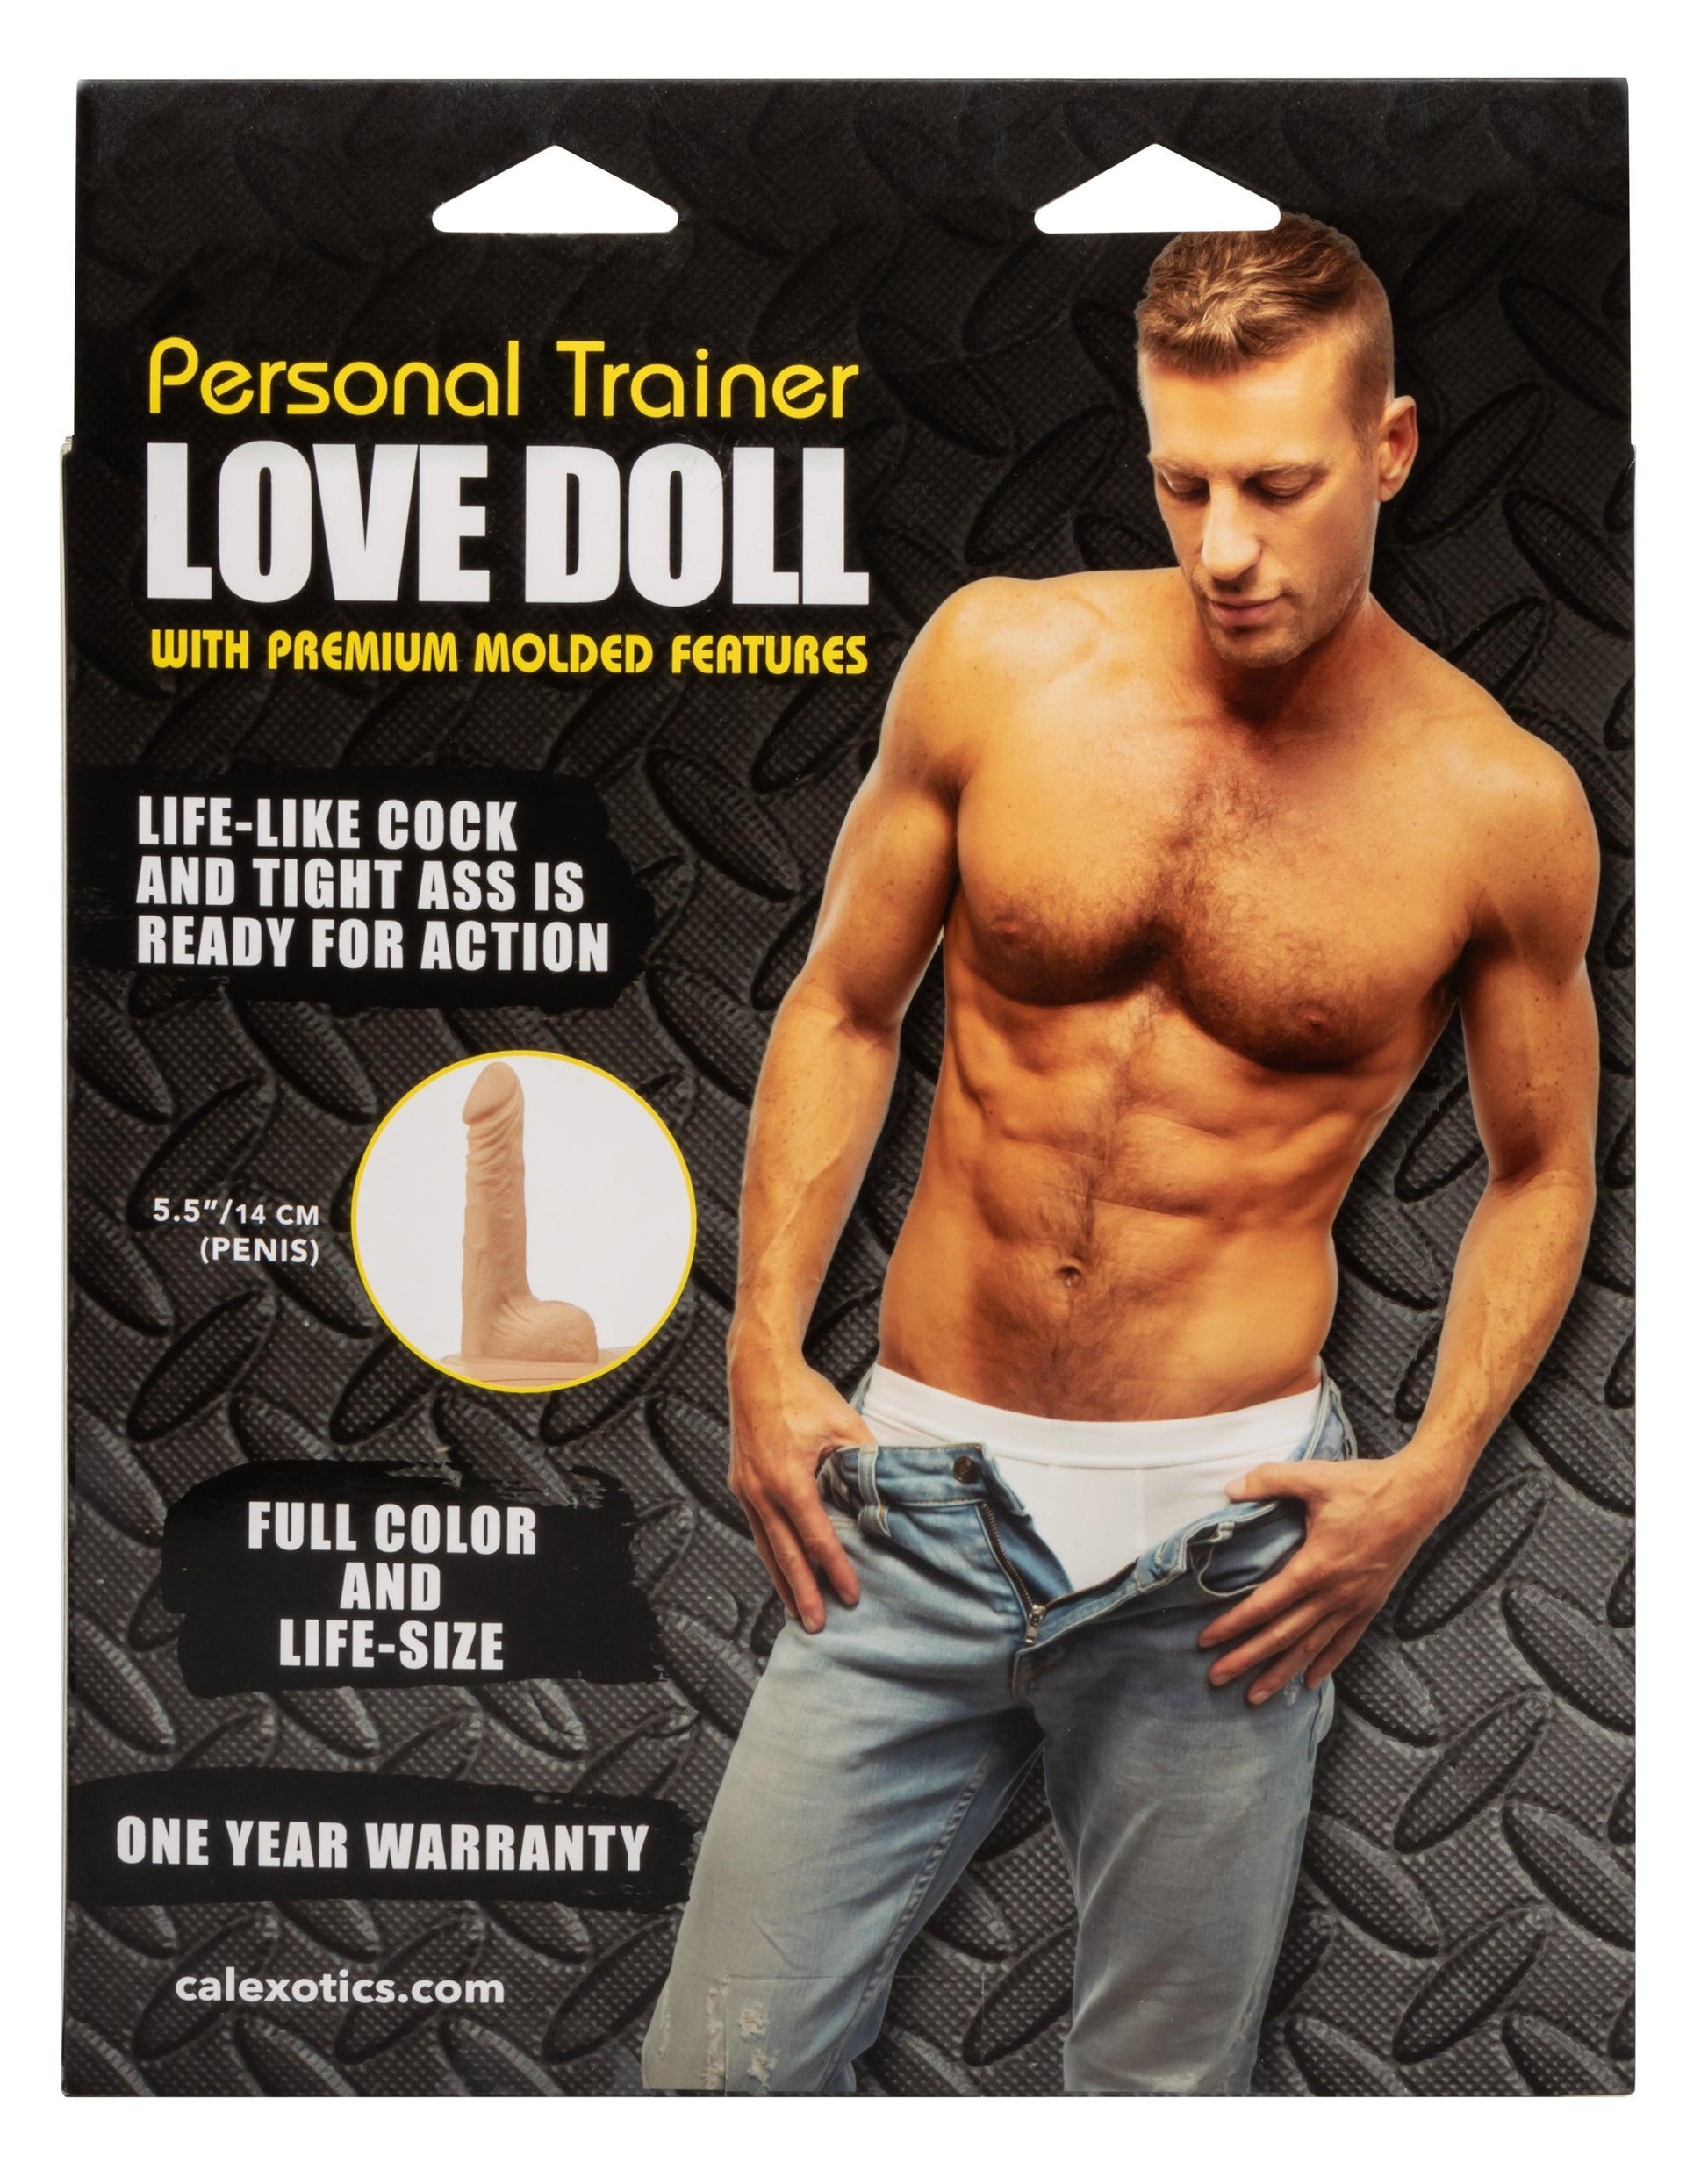 Personal Trainer Love Doll - My Sex Toy Hub